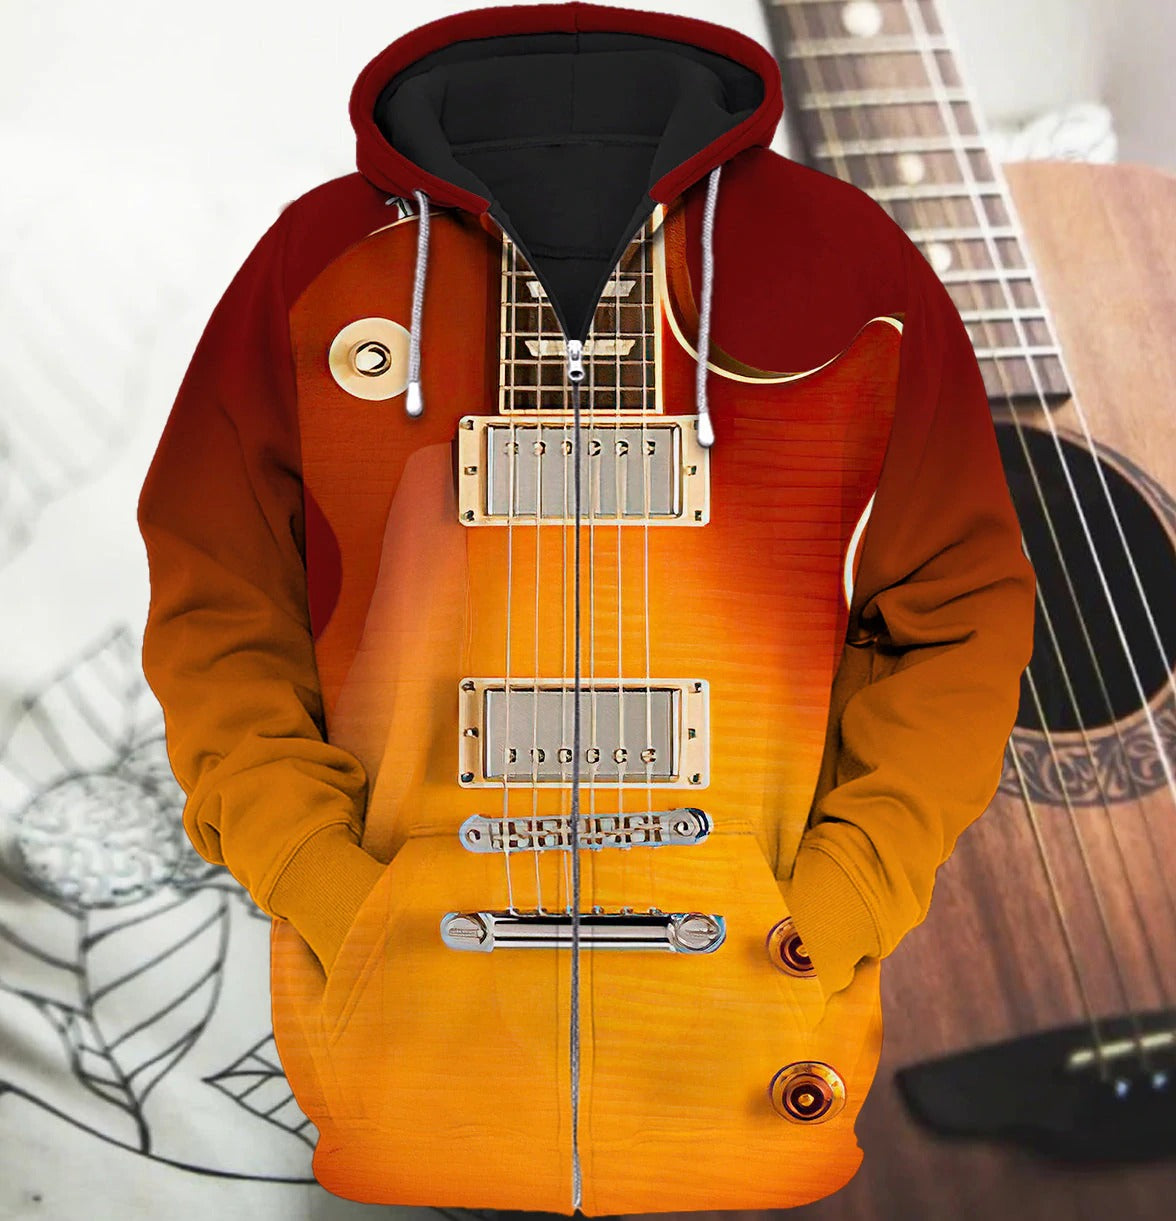 3D All Over Print Electric Guitar T Shirt/ Guitar Lover 3D Hoodie Shirts/ Gift For Guitar Men Woman